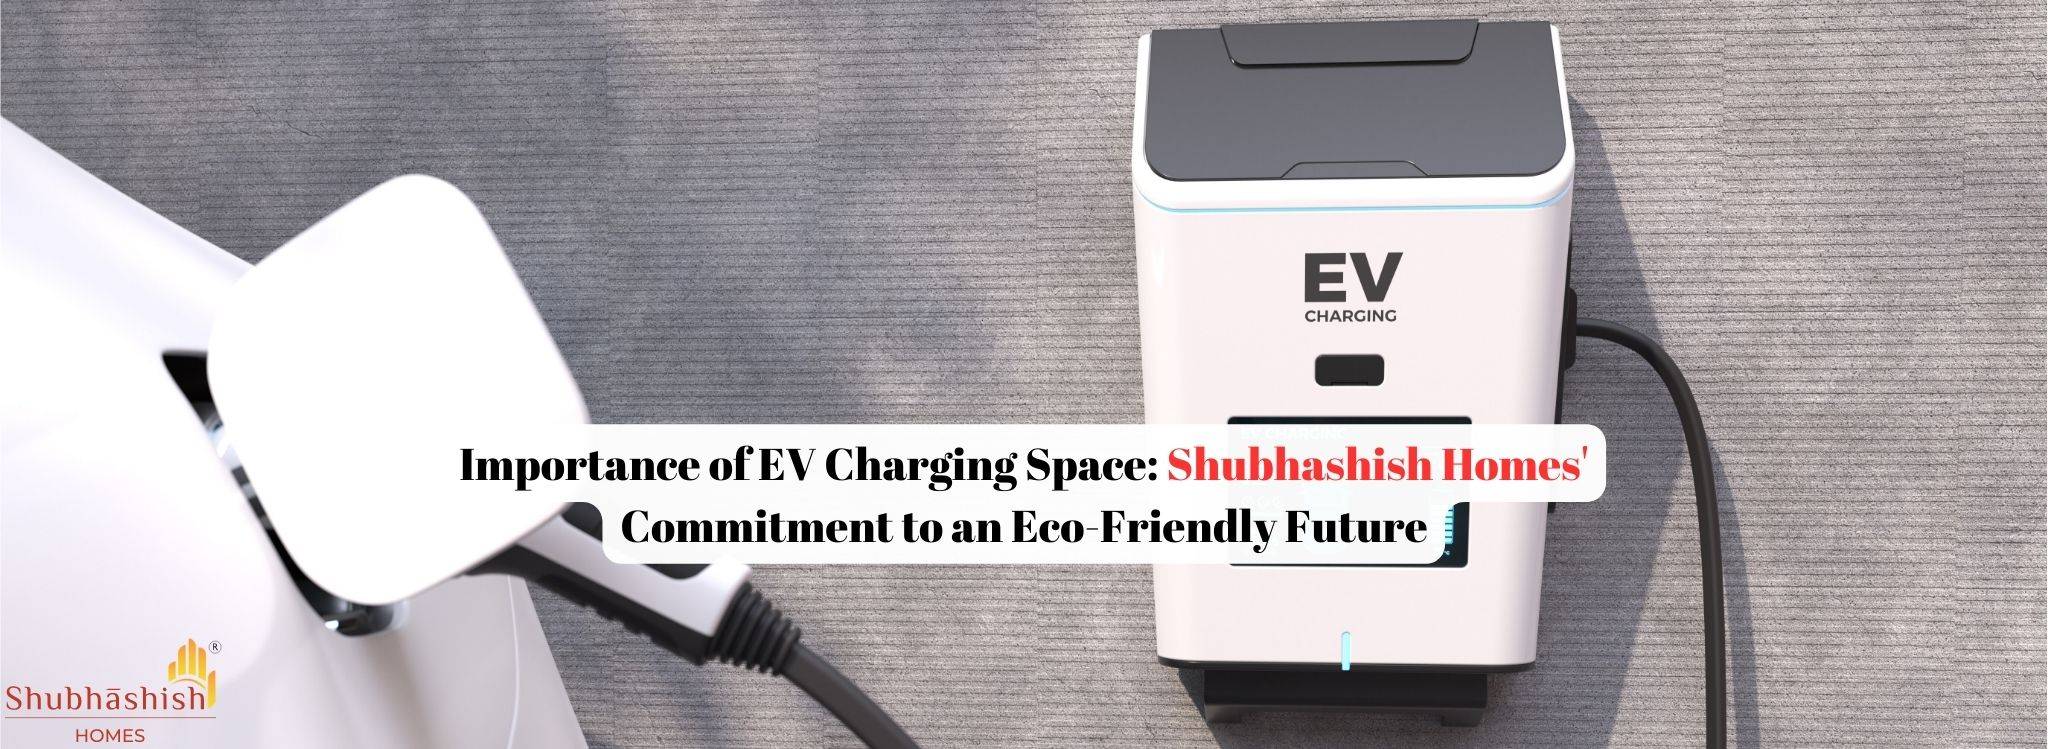 Importance of EV Charging Space: Shubhashish Homes?Commitment to an Eco-Friendly Future